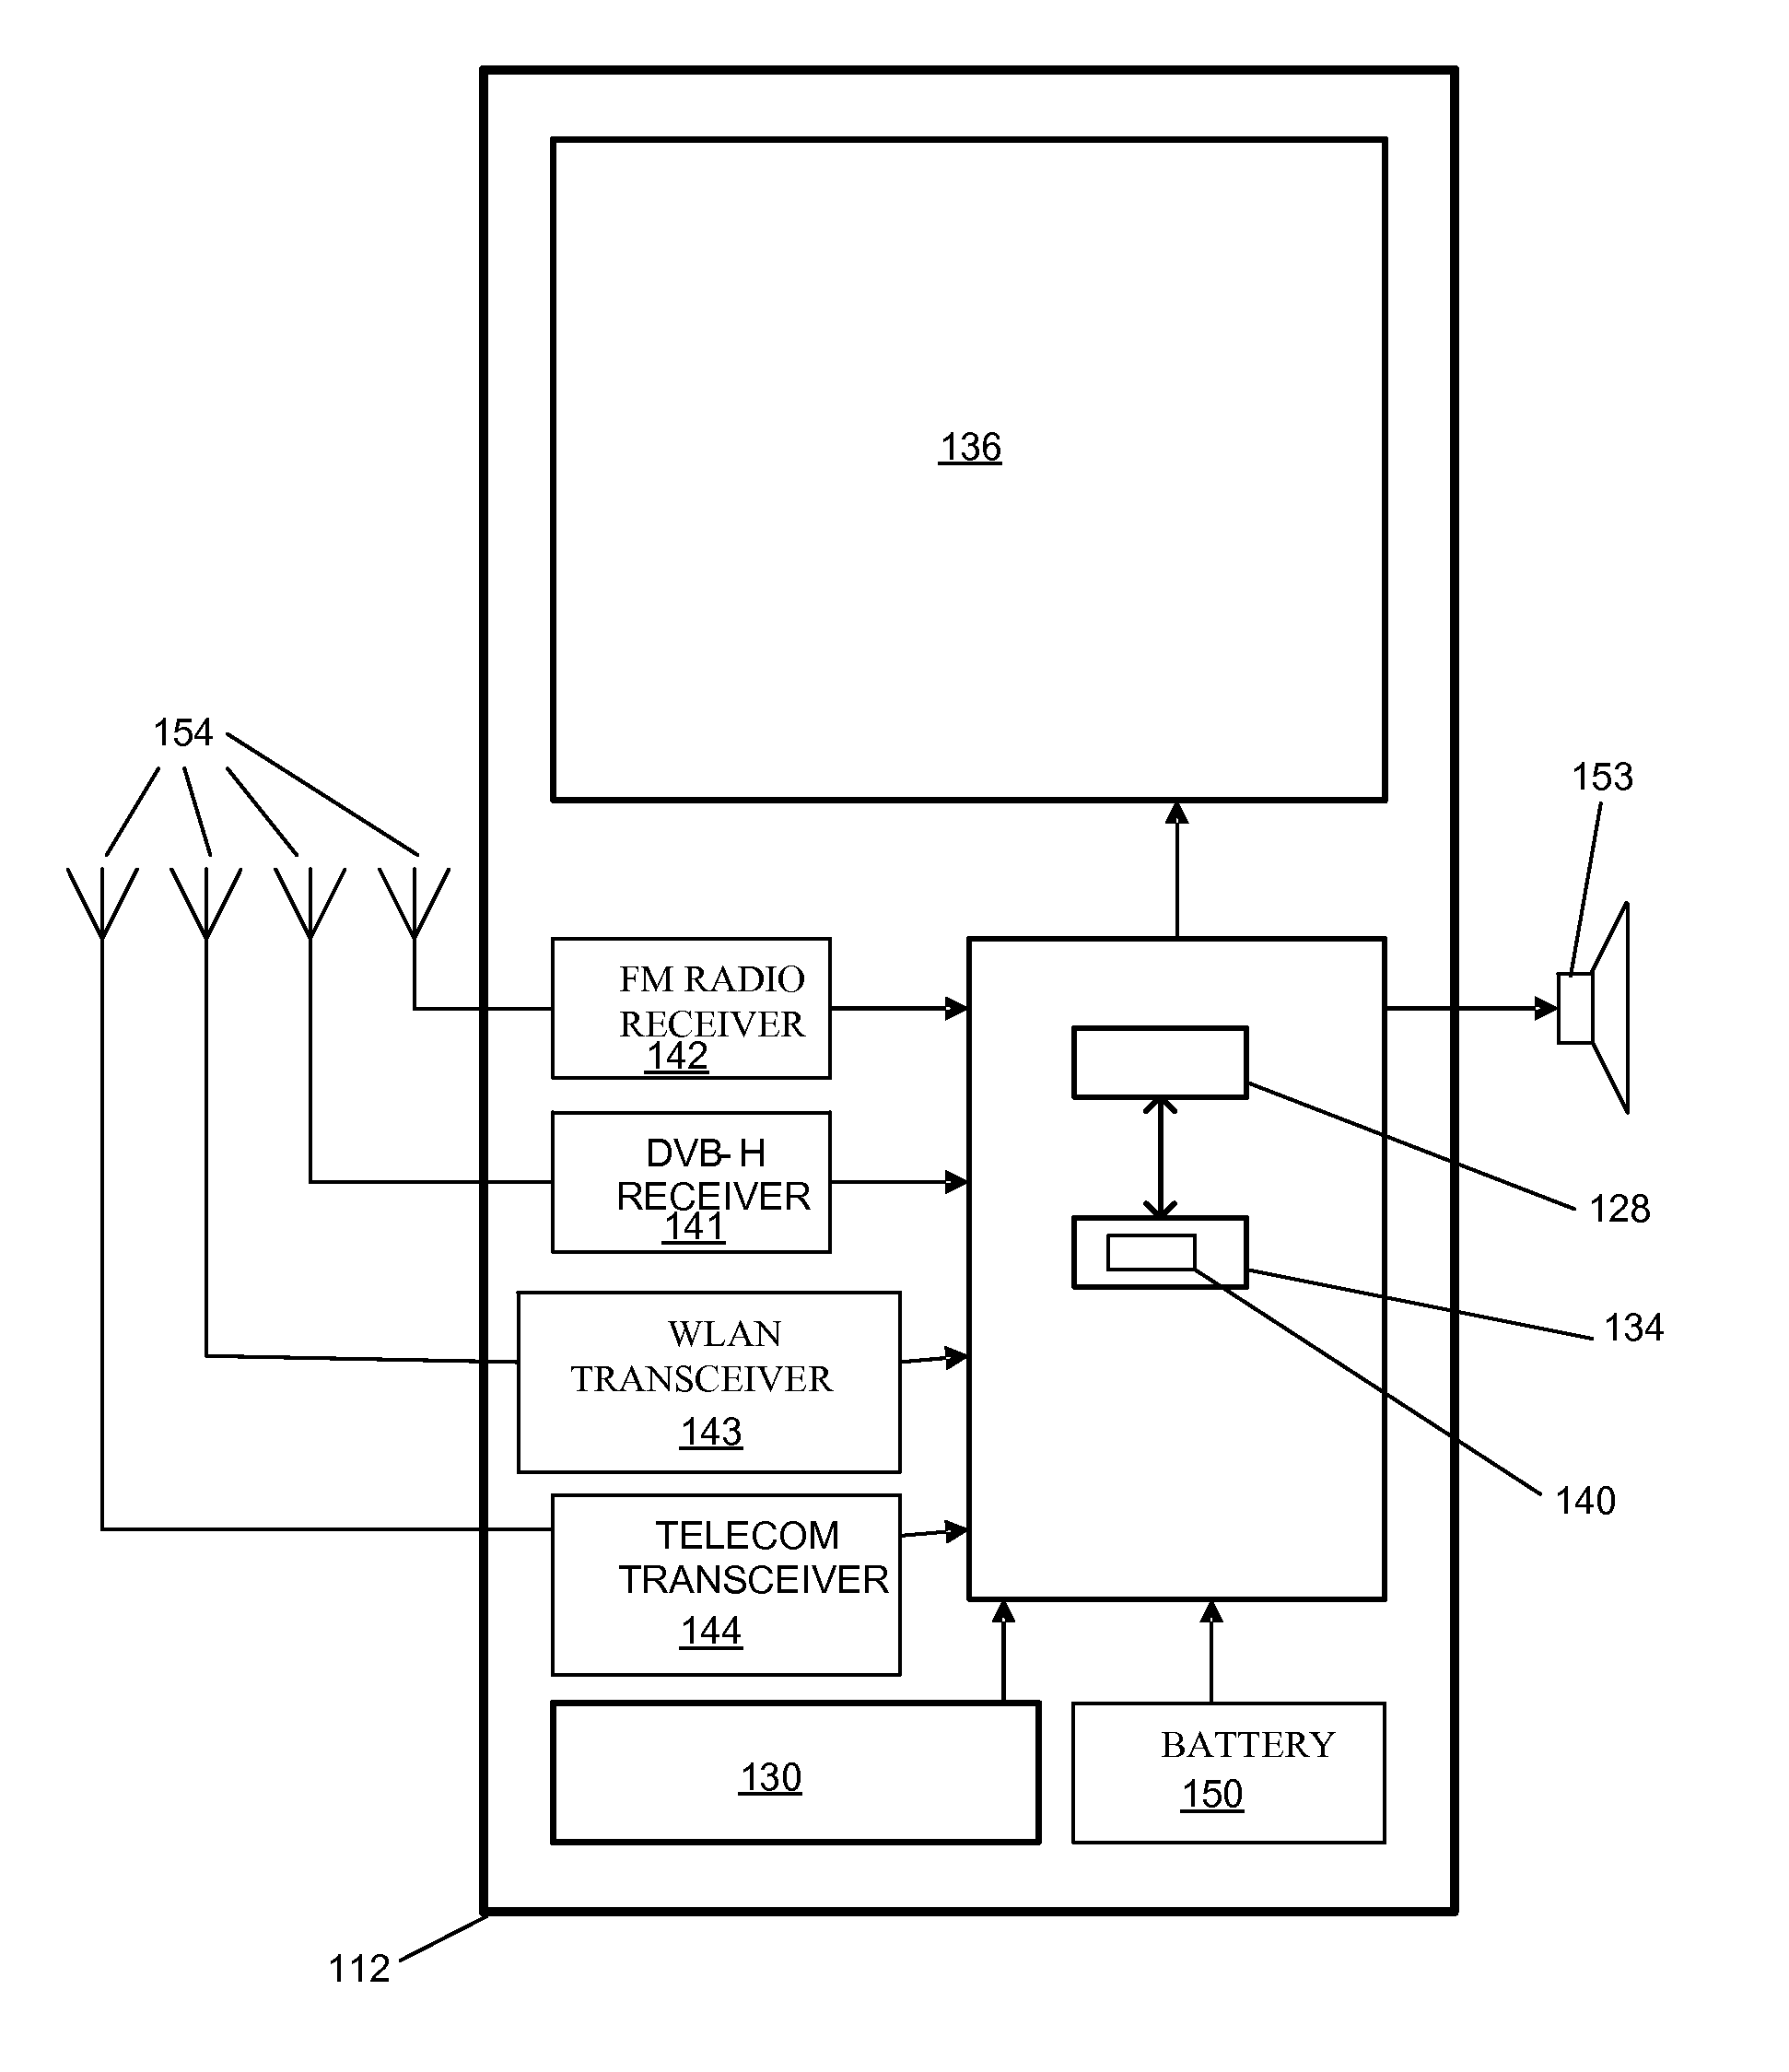 System and method for browsing an image database